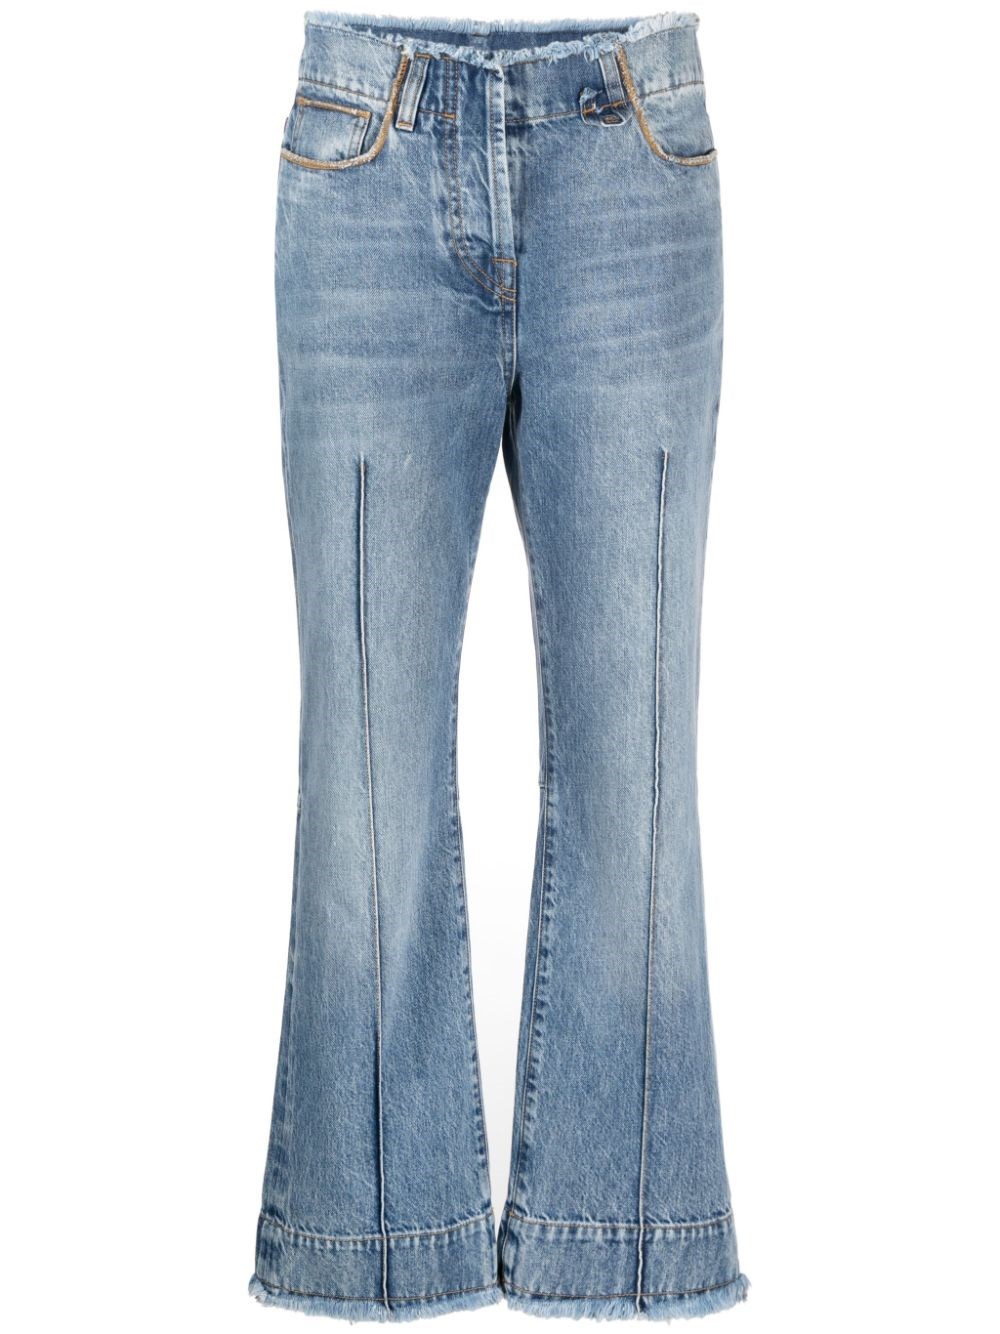 JACQUEMUS FRAYED CROPPED JEANS DE NIMES